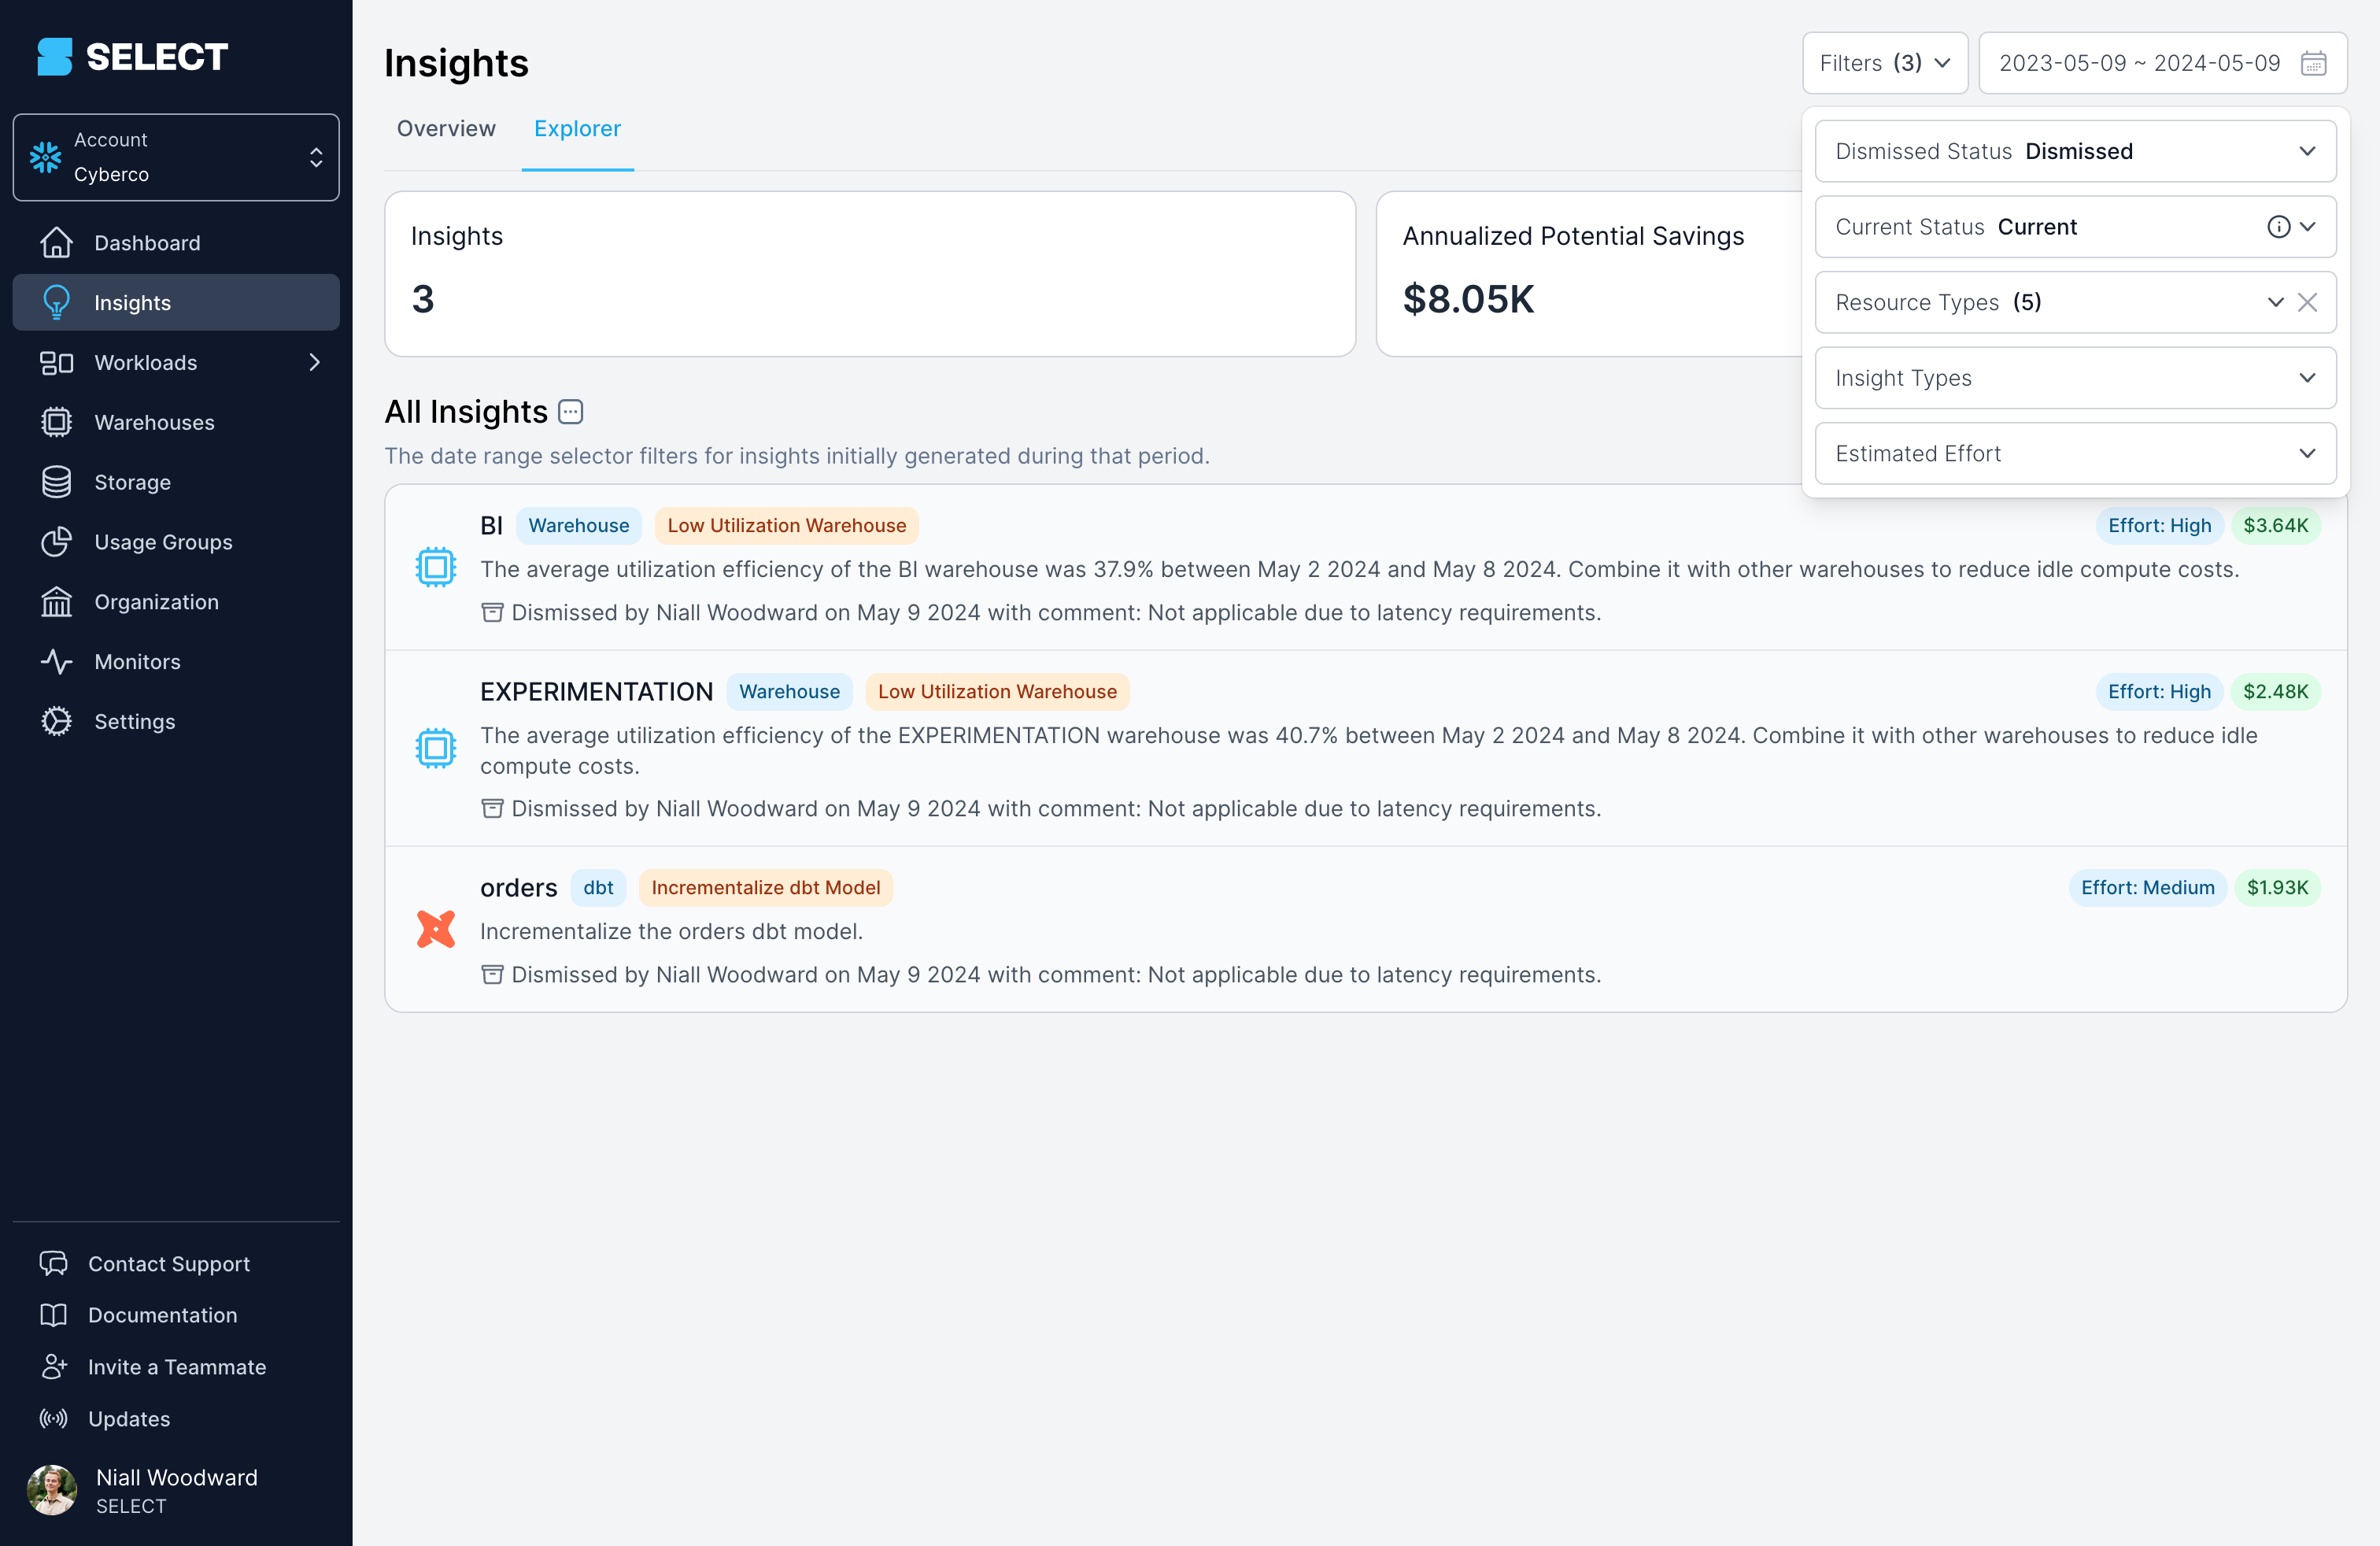 Dismissing insights in SELECT